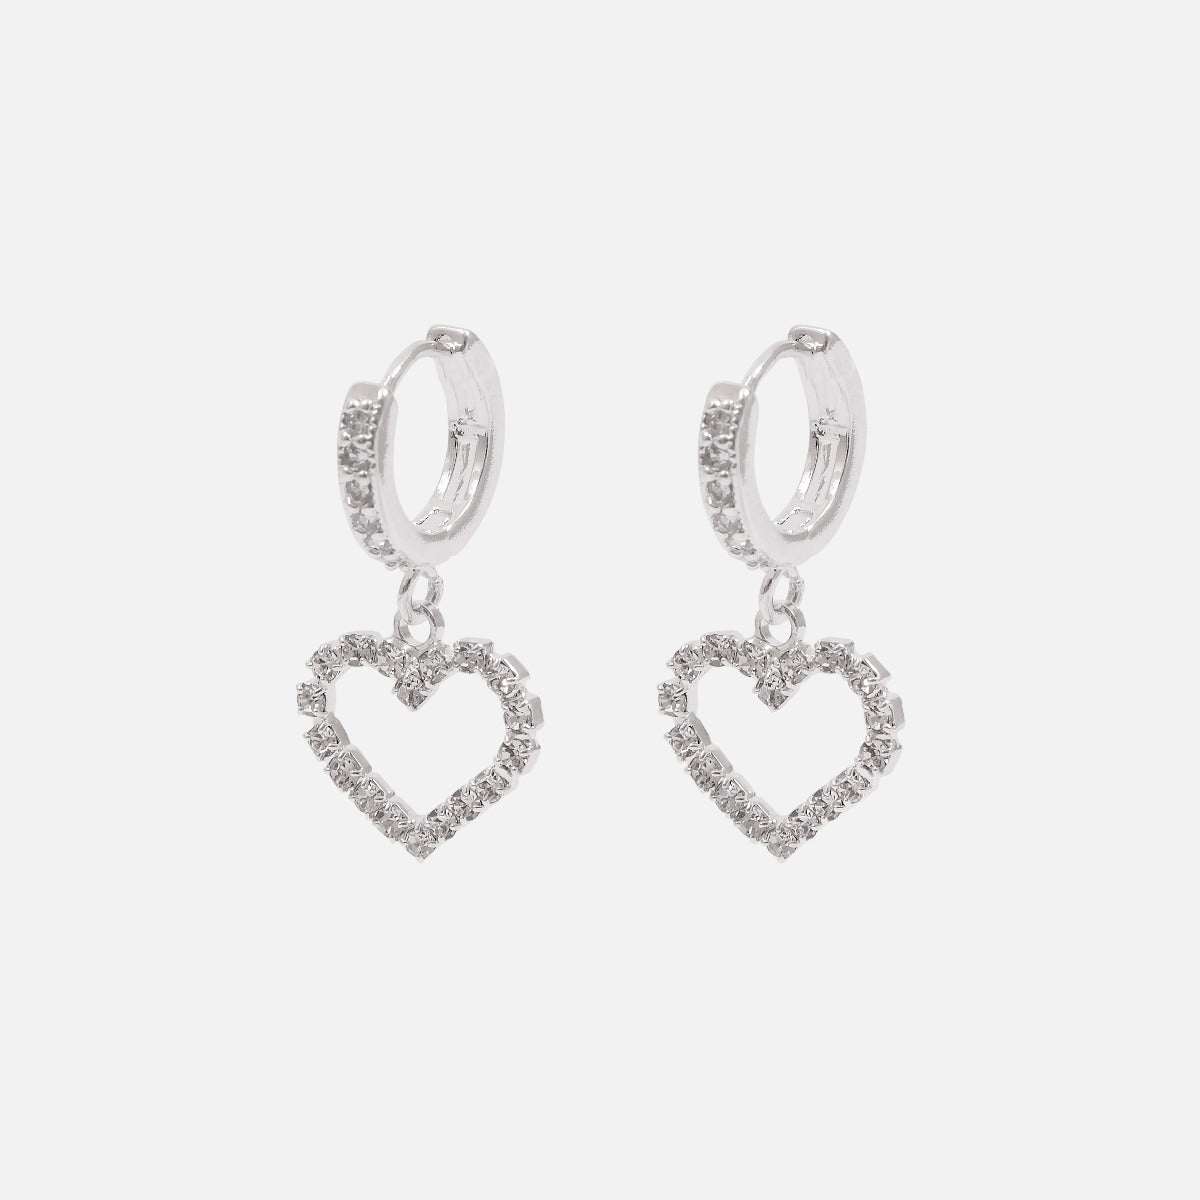 Silvered hoop earrings with sparkling stones and a heart charm